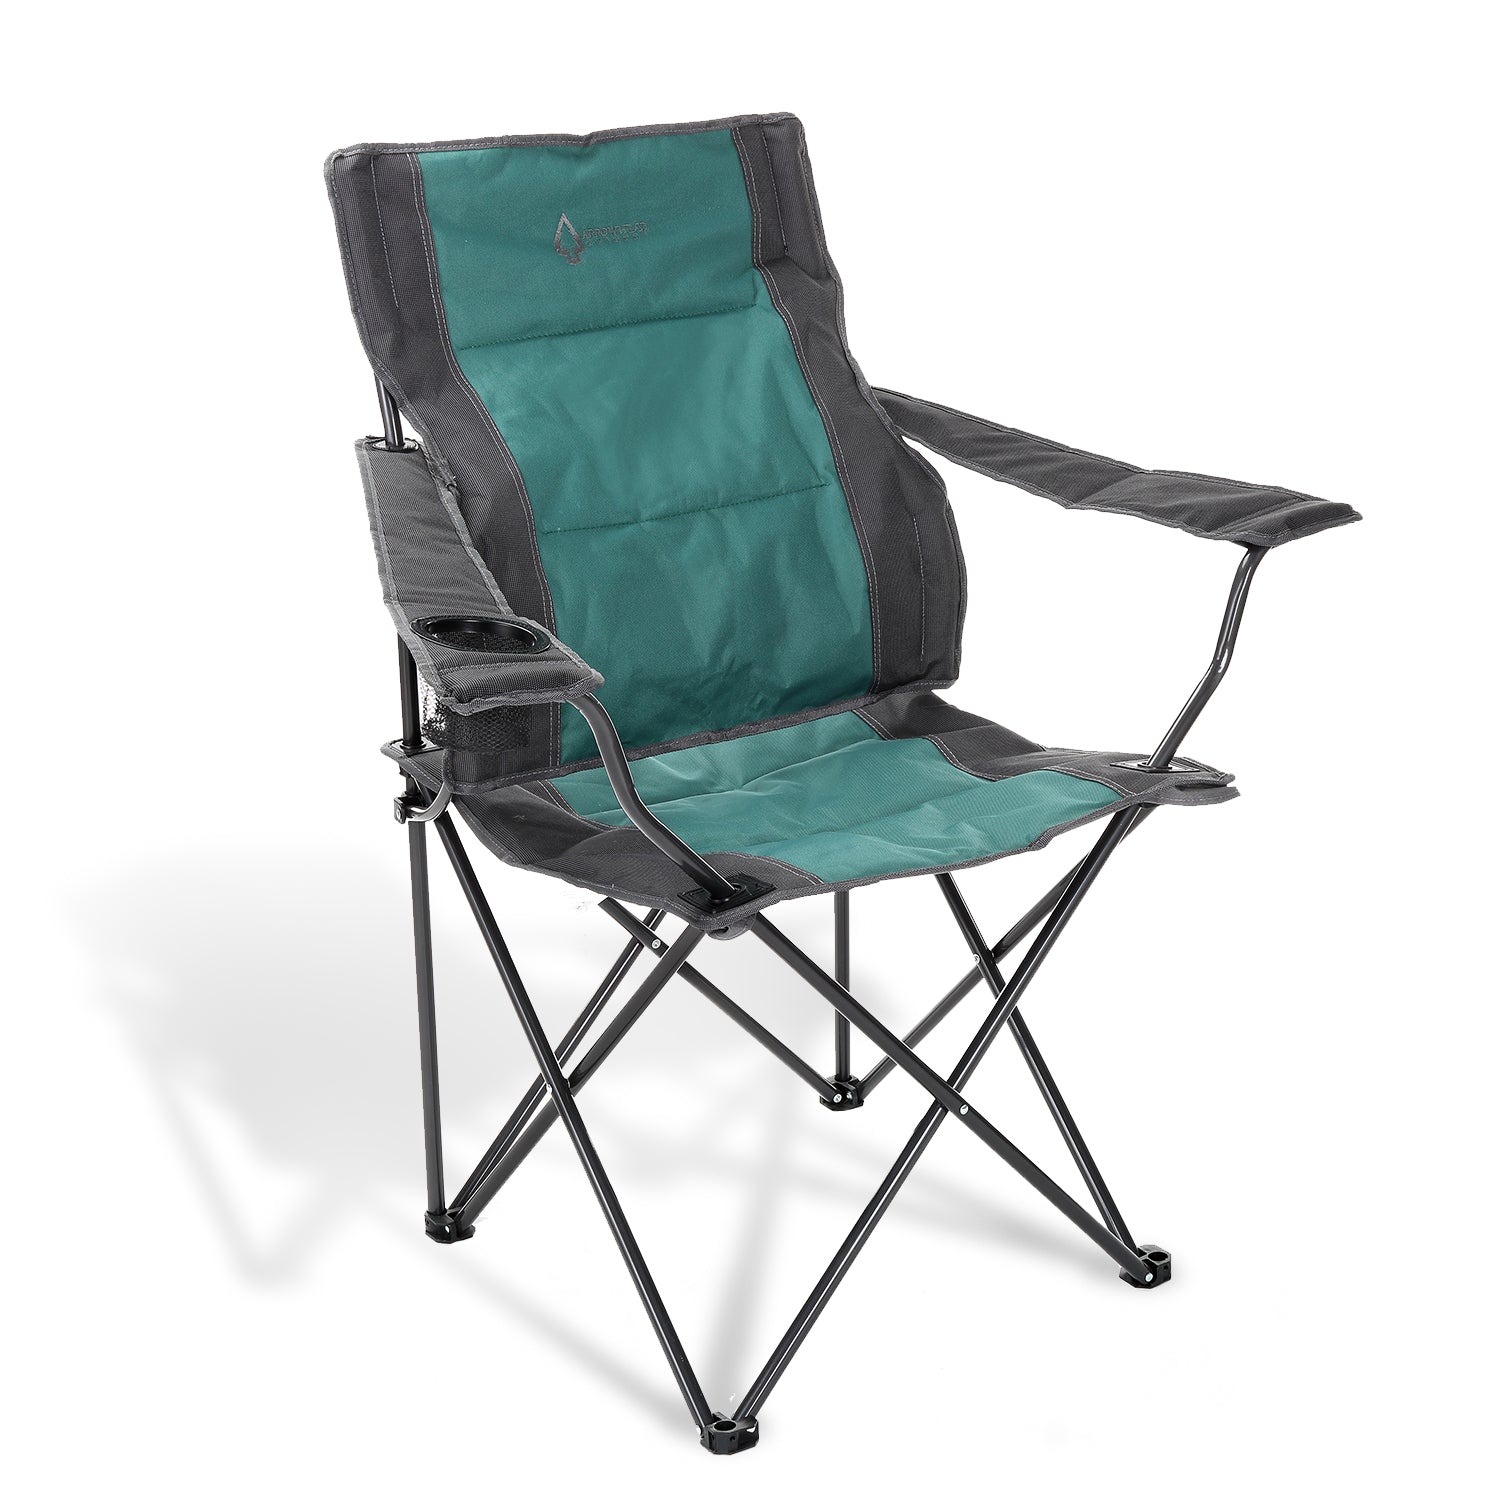 ARROWHEAD OUTDOOR Portable Folding Camping Quad Chair w/ 4-Can Cooler,  Cup-Holder, Heavy-Duty Carrying Bag w/ Easy Carry Shoulder Strap, Padded  Armrests, Supports up to 330lbs, USA-Based Support (Tan) 